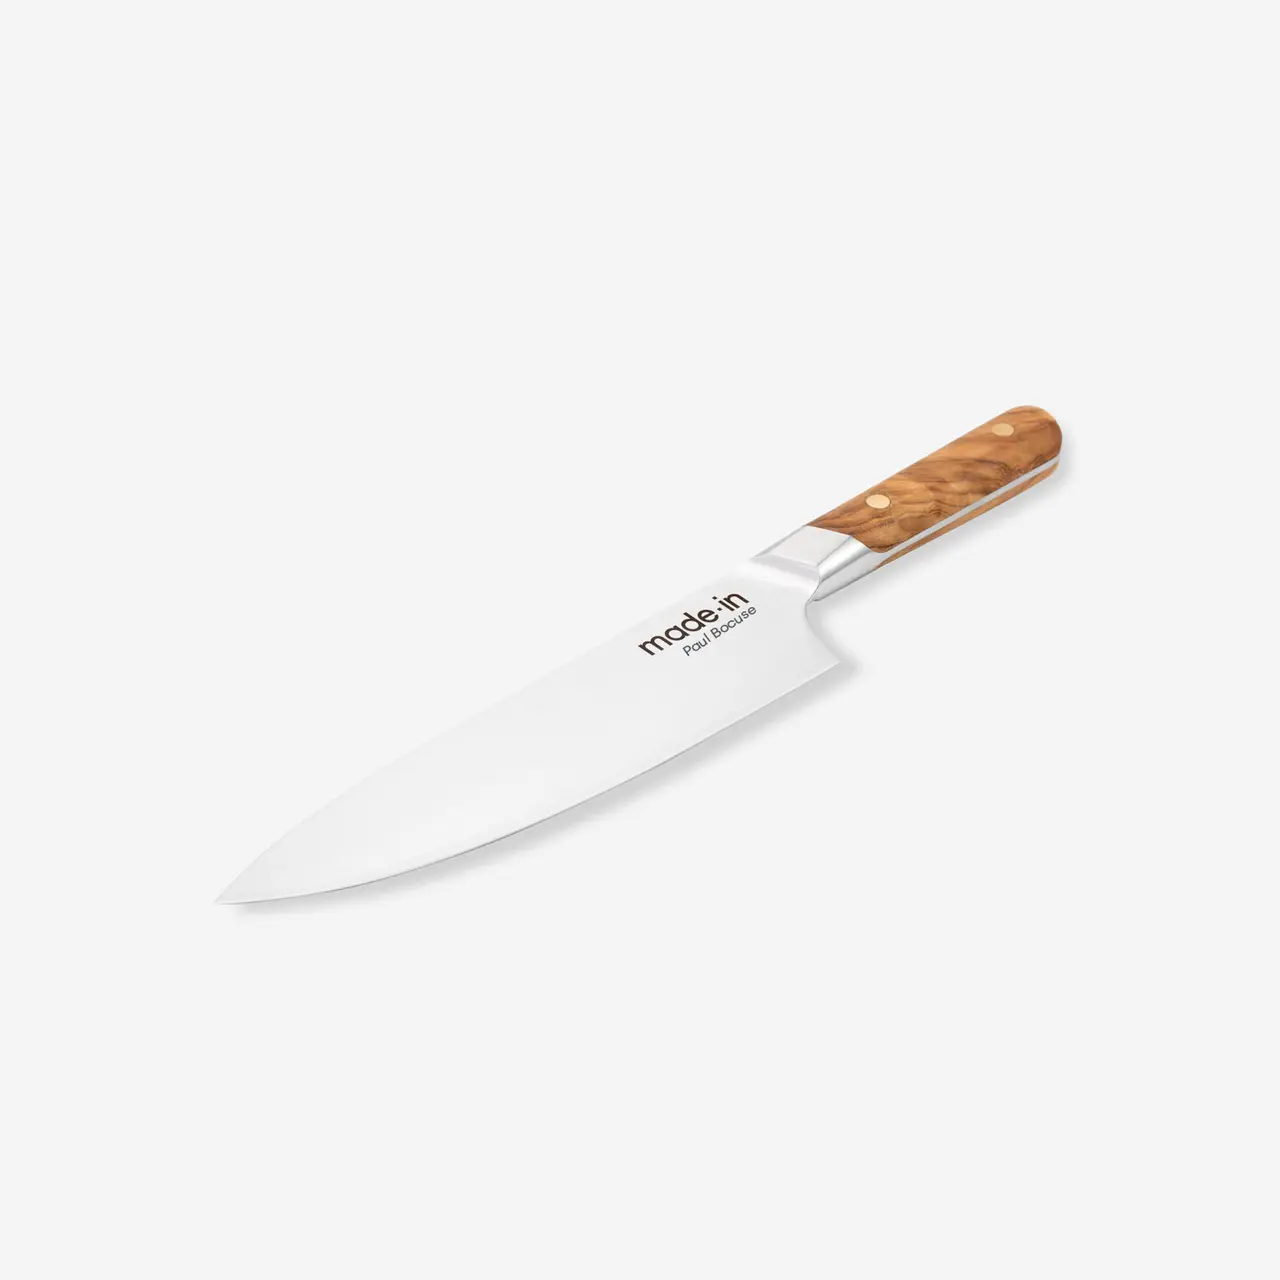 A chef's knife with a smooth wooden handle and "made in" text on the blade against a white background.